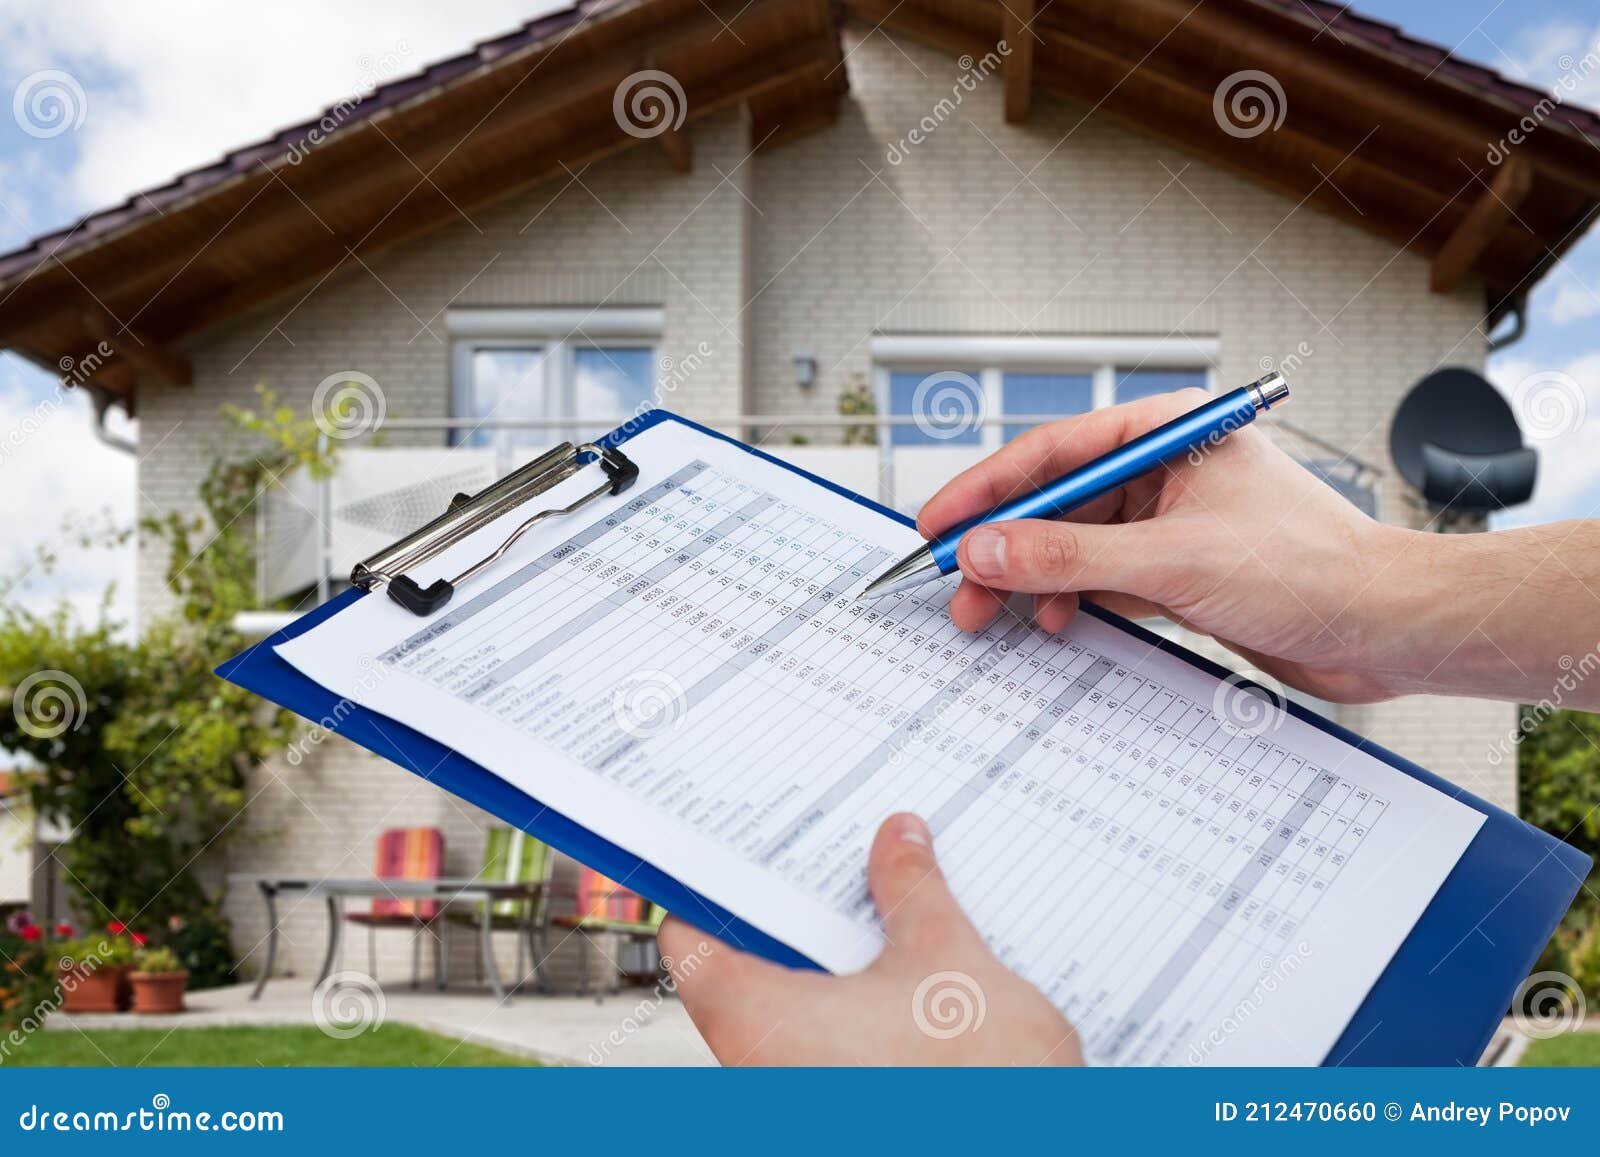 real estate home property inspecting